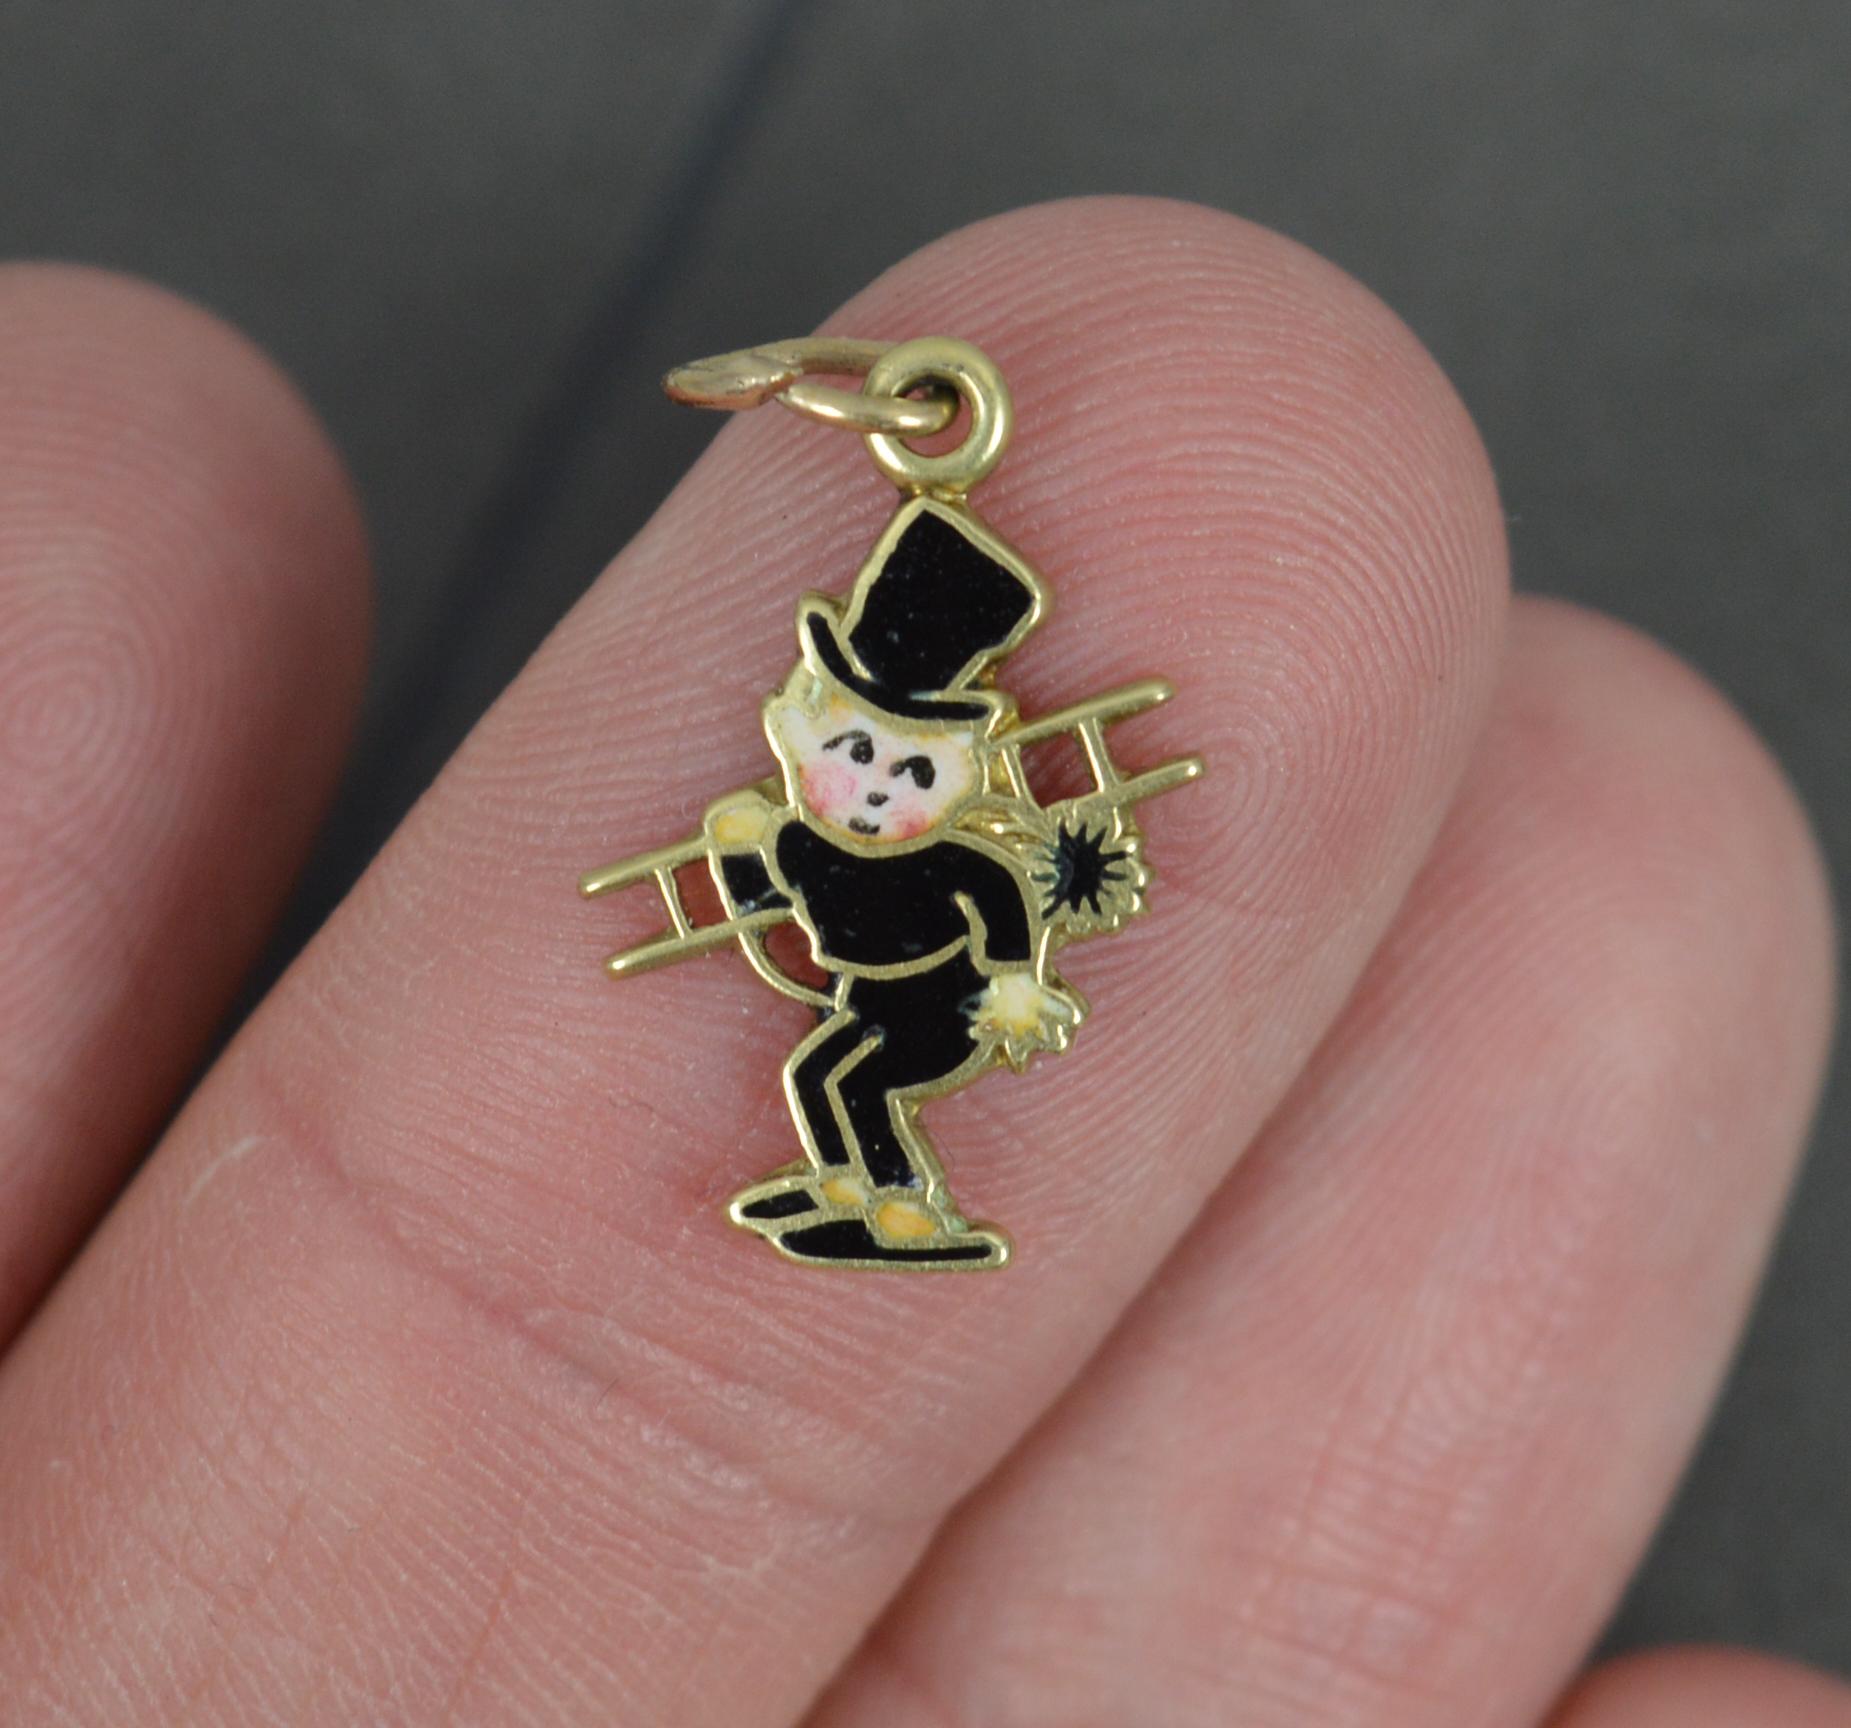 A solid 14 carat gold and enamel charm pendant.
A vintage example.
Chimney sweep design.

Condition ; Excellent. Crisp design. Issue free.

Please view photographs though note they are significantly bigger than the actual item and show any blemishes